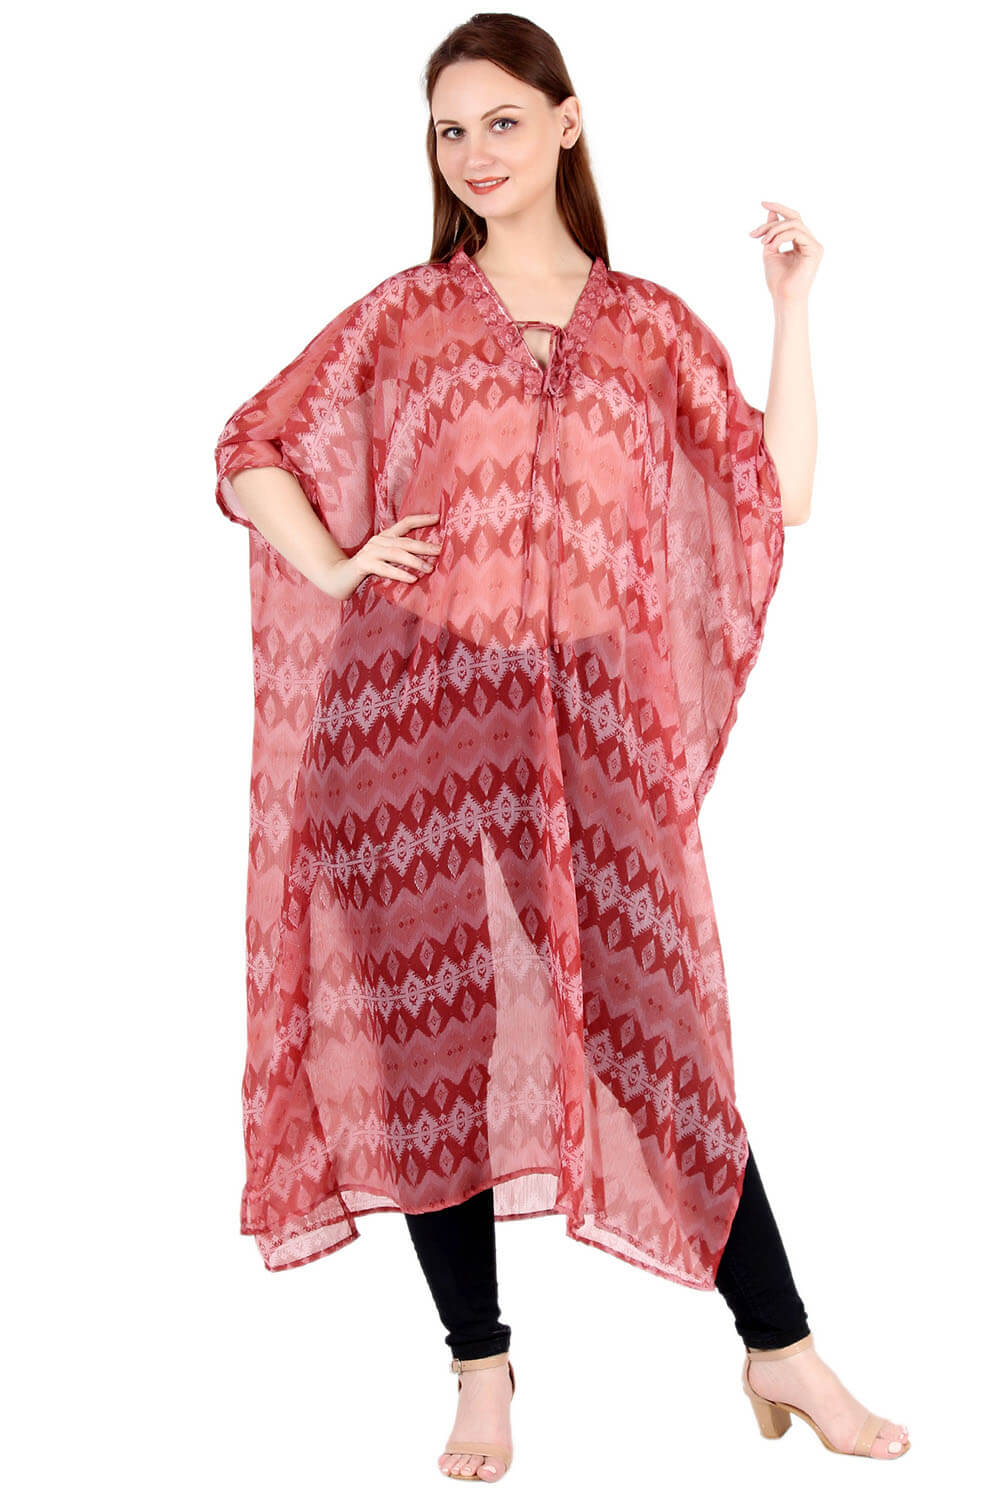 Refined and Airy Printed Kaftan